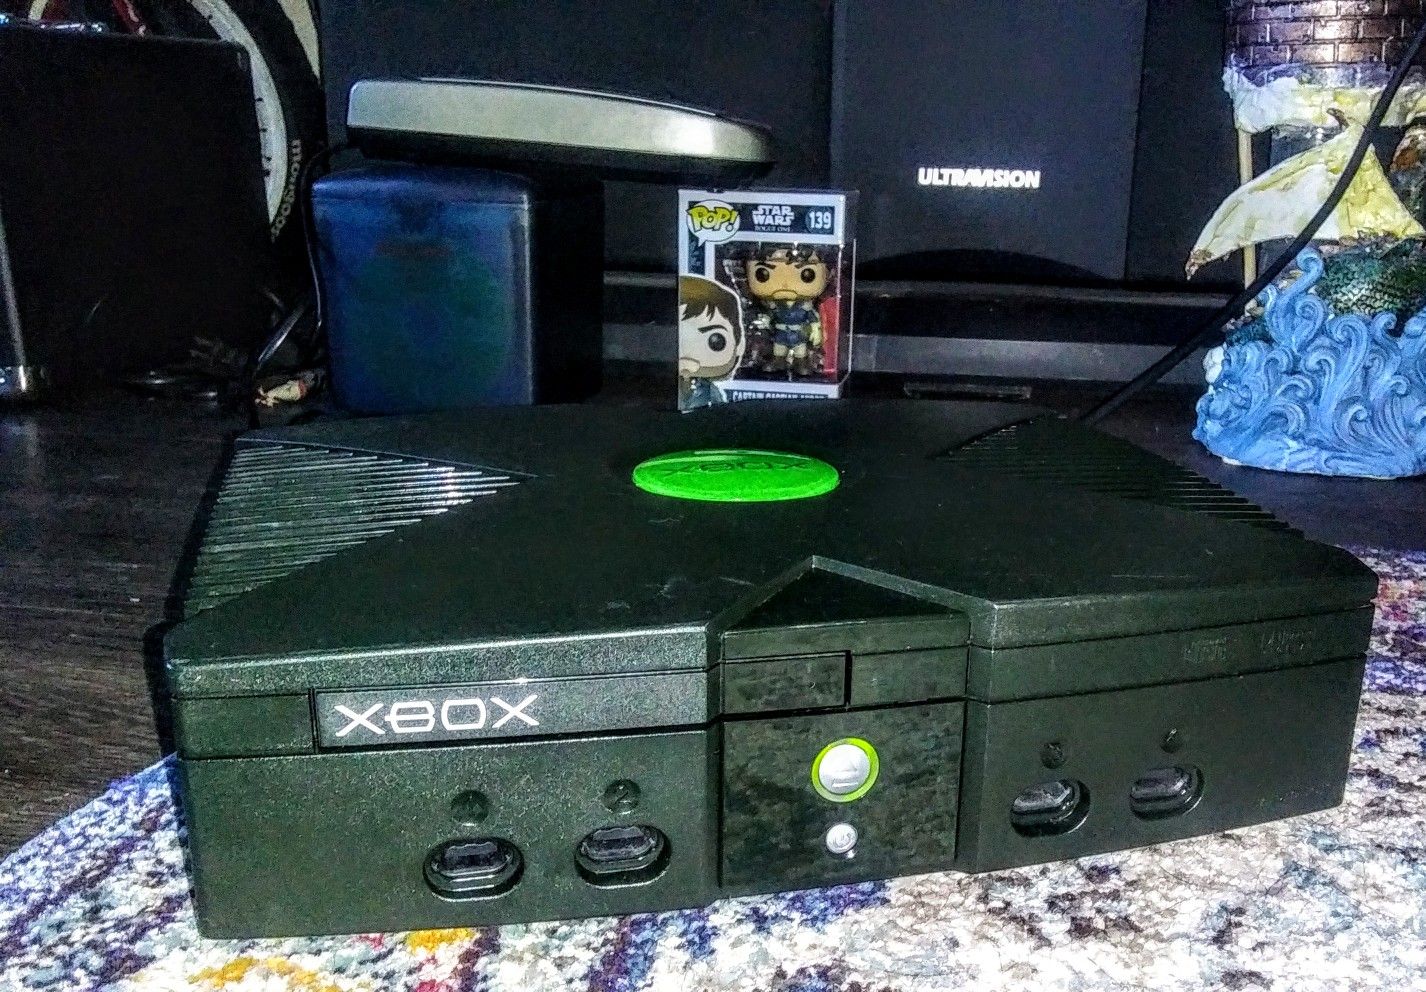 Working Original XBOX System with Games